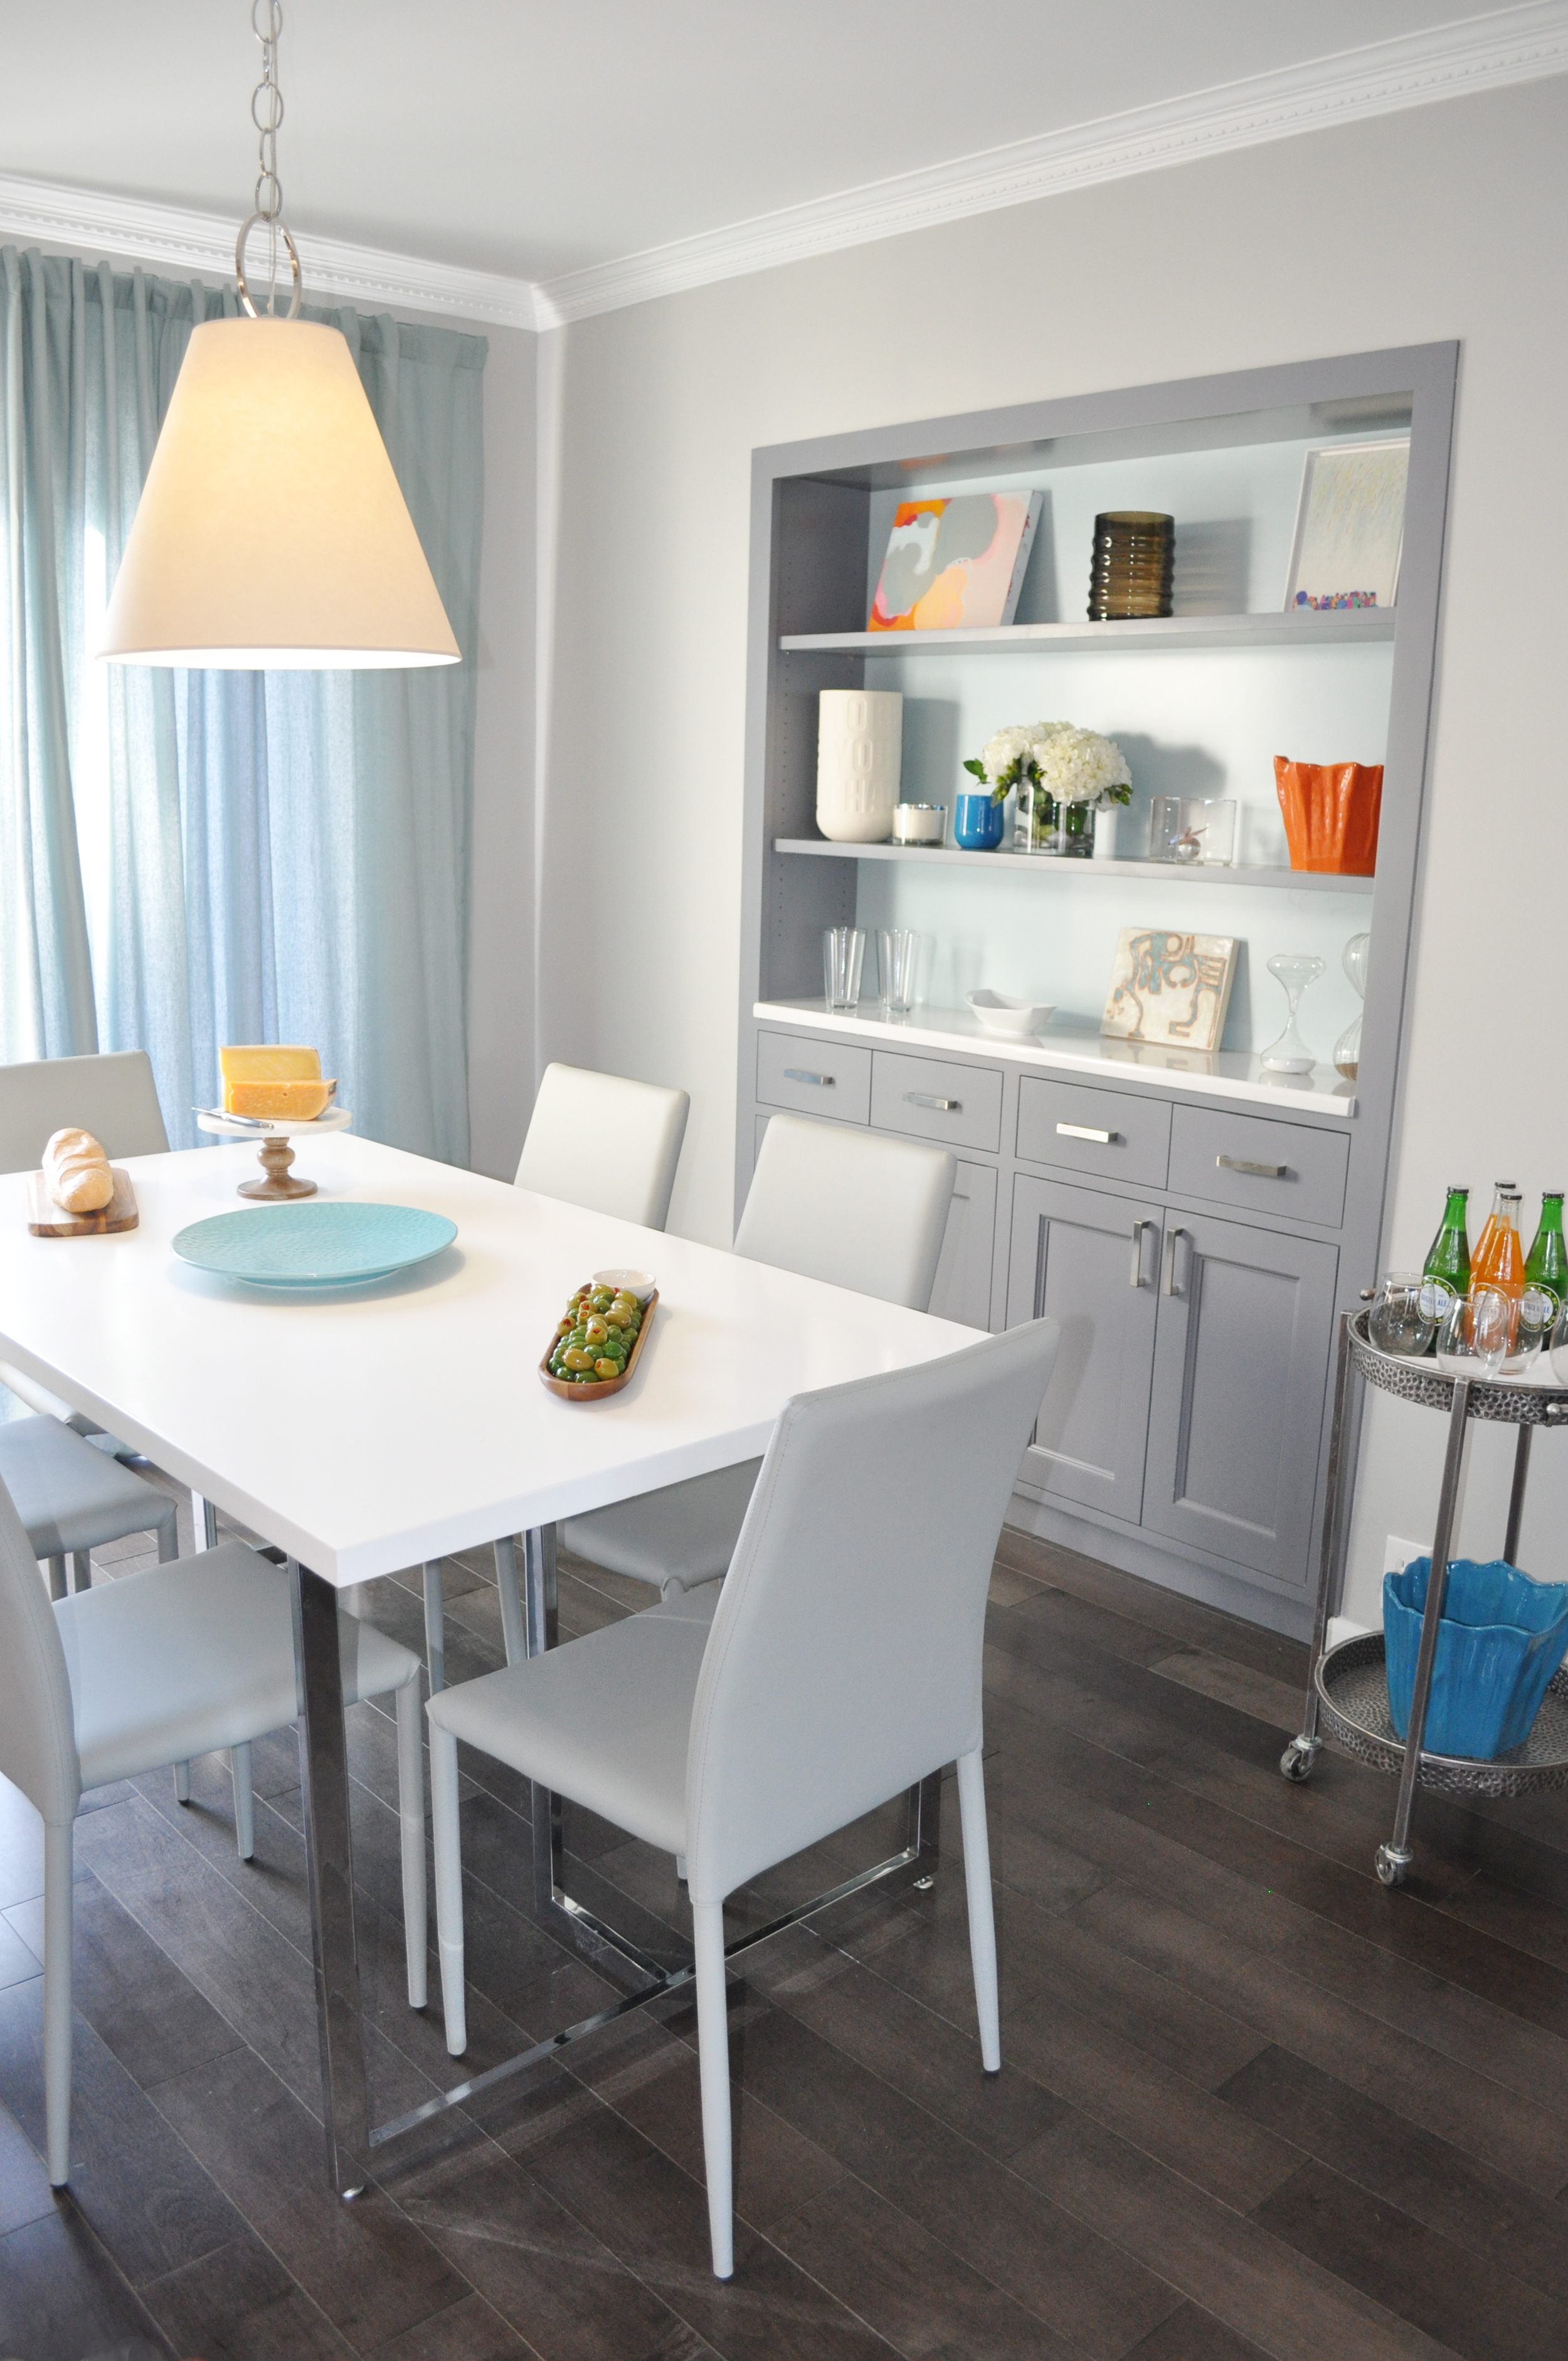 Kim Mitchell Production Designer_HGTV_Buying and Selling with The Property Brothers_Season 3_Episode 316_Dining Room Design_Dining Room Cabinetry_Kitchen Table Pendant Light_Grey Wood Flooring_Kenise Barnes Gallery Art_Grey Cabinets.jpg